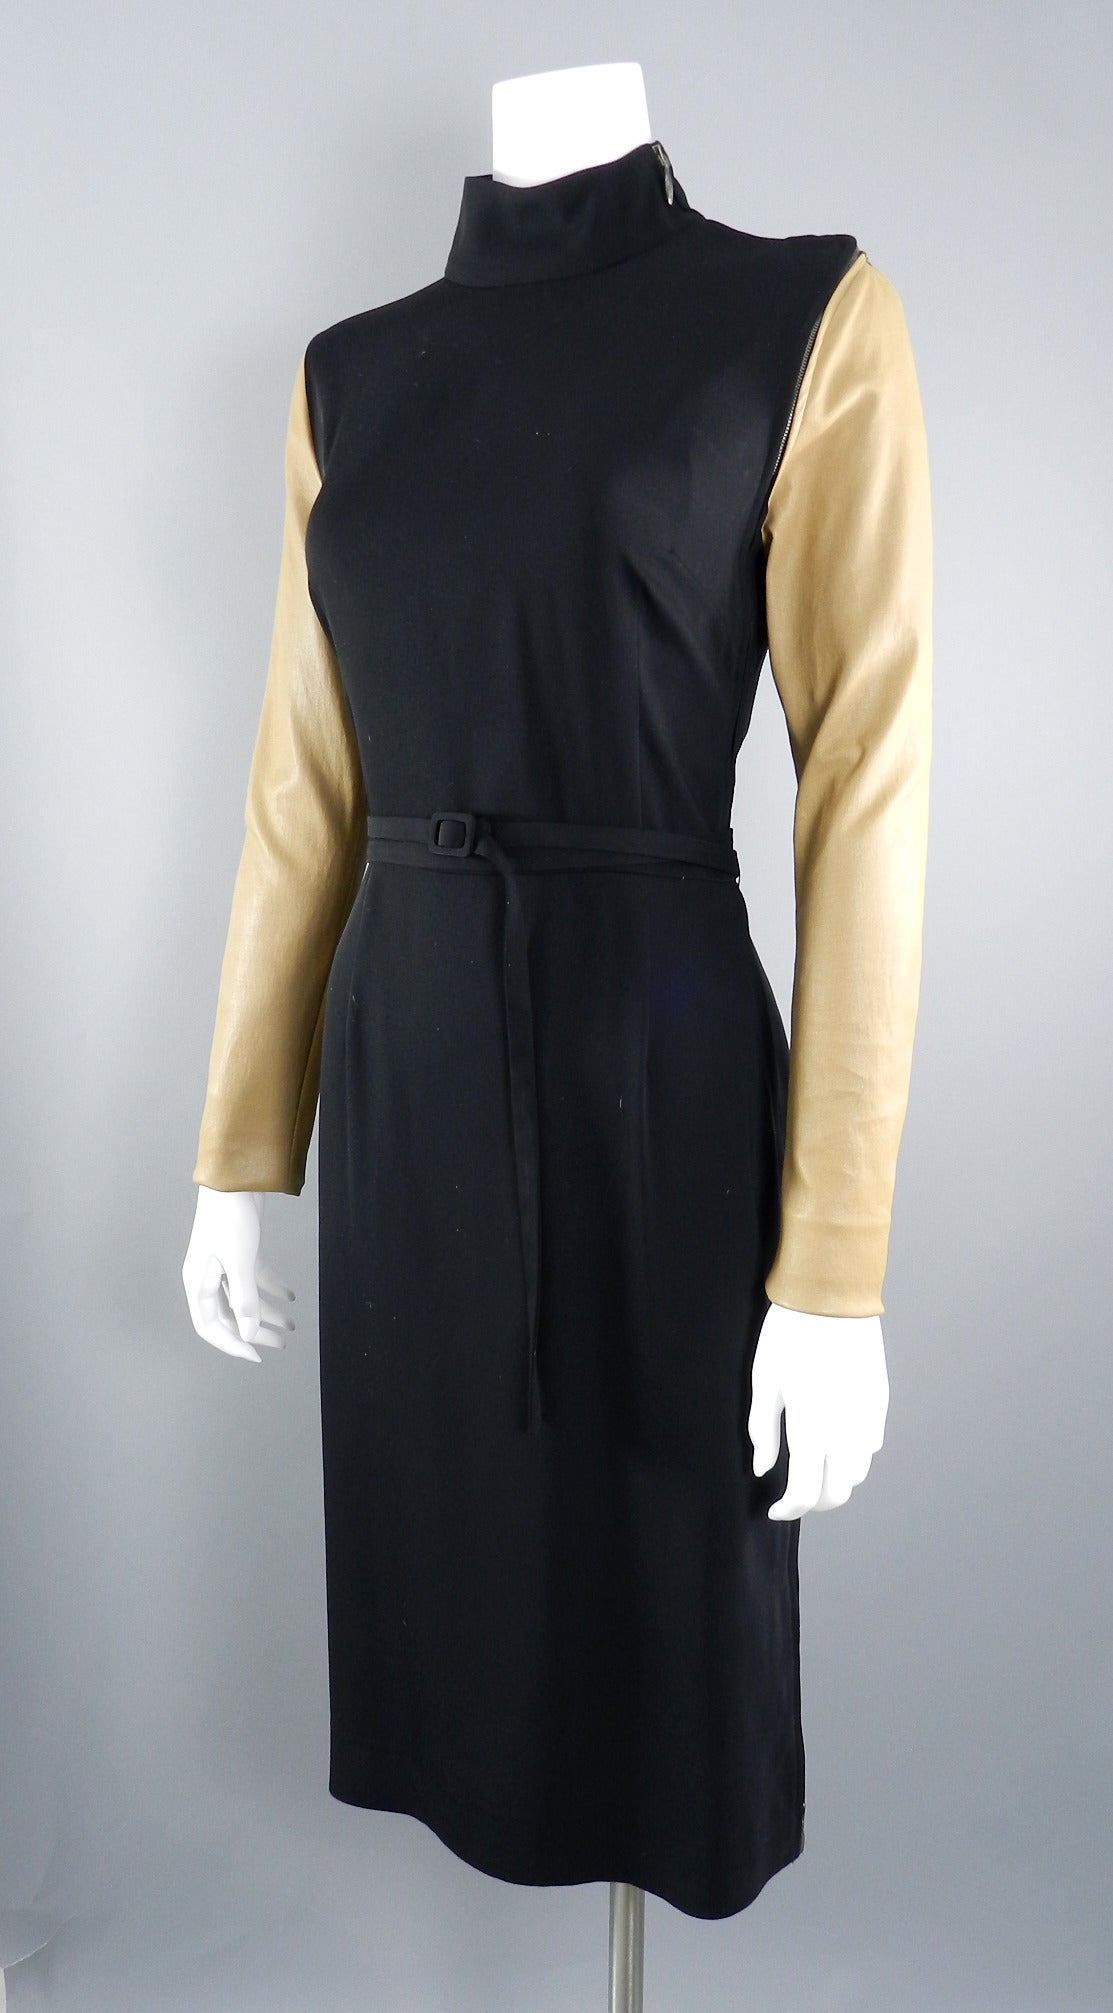 Maison Martin Margiela black dress with tan stretch leather sleeves. Tagged size IT 42 (USA 6). Will fit 34/35